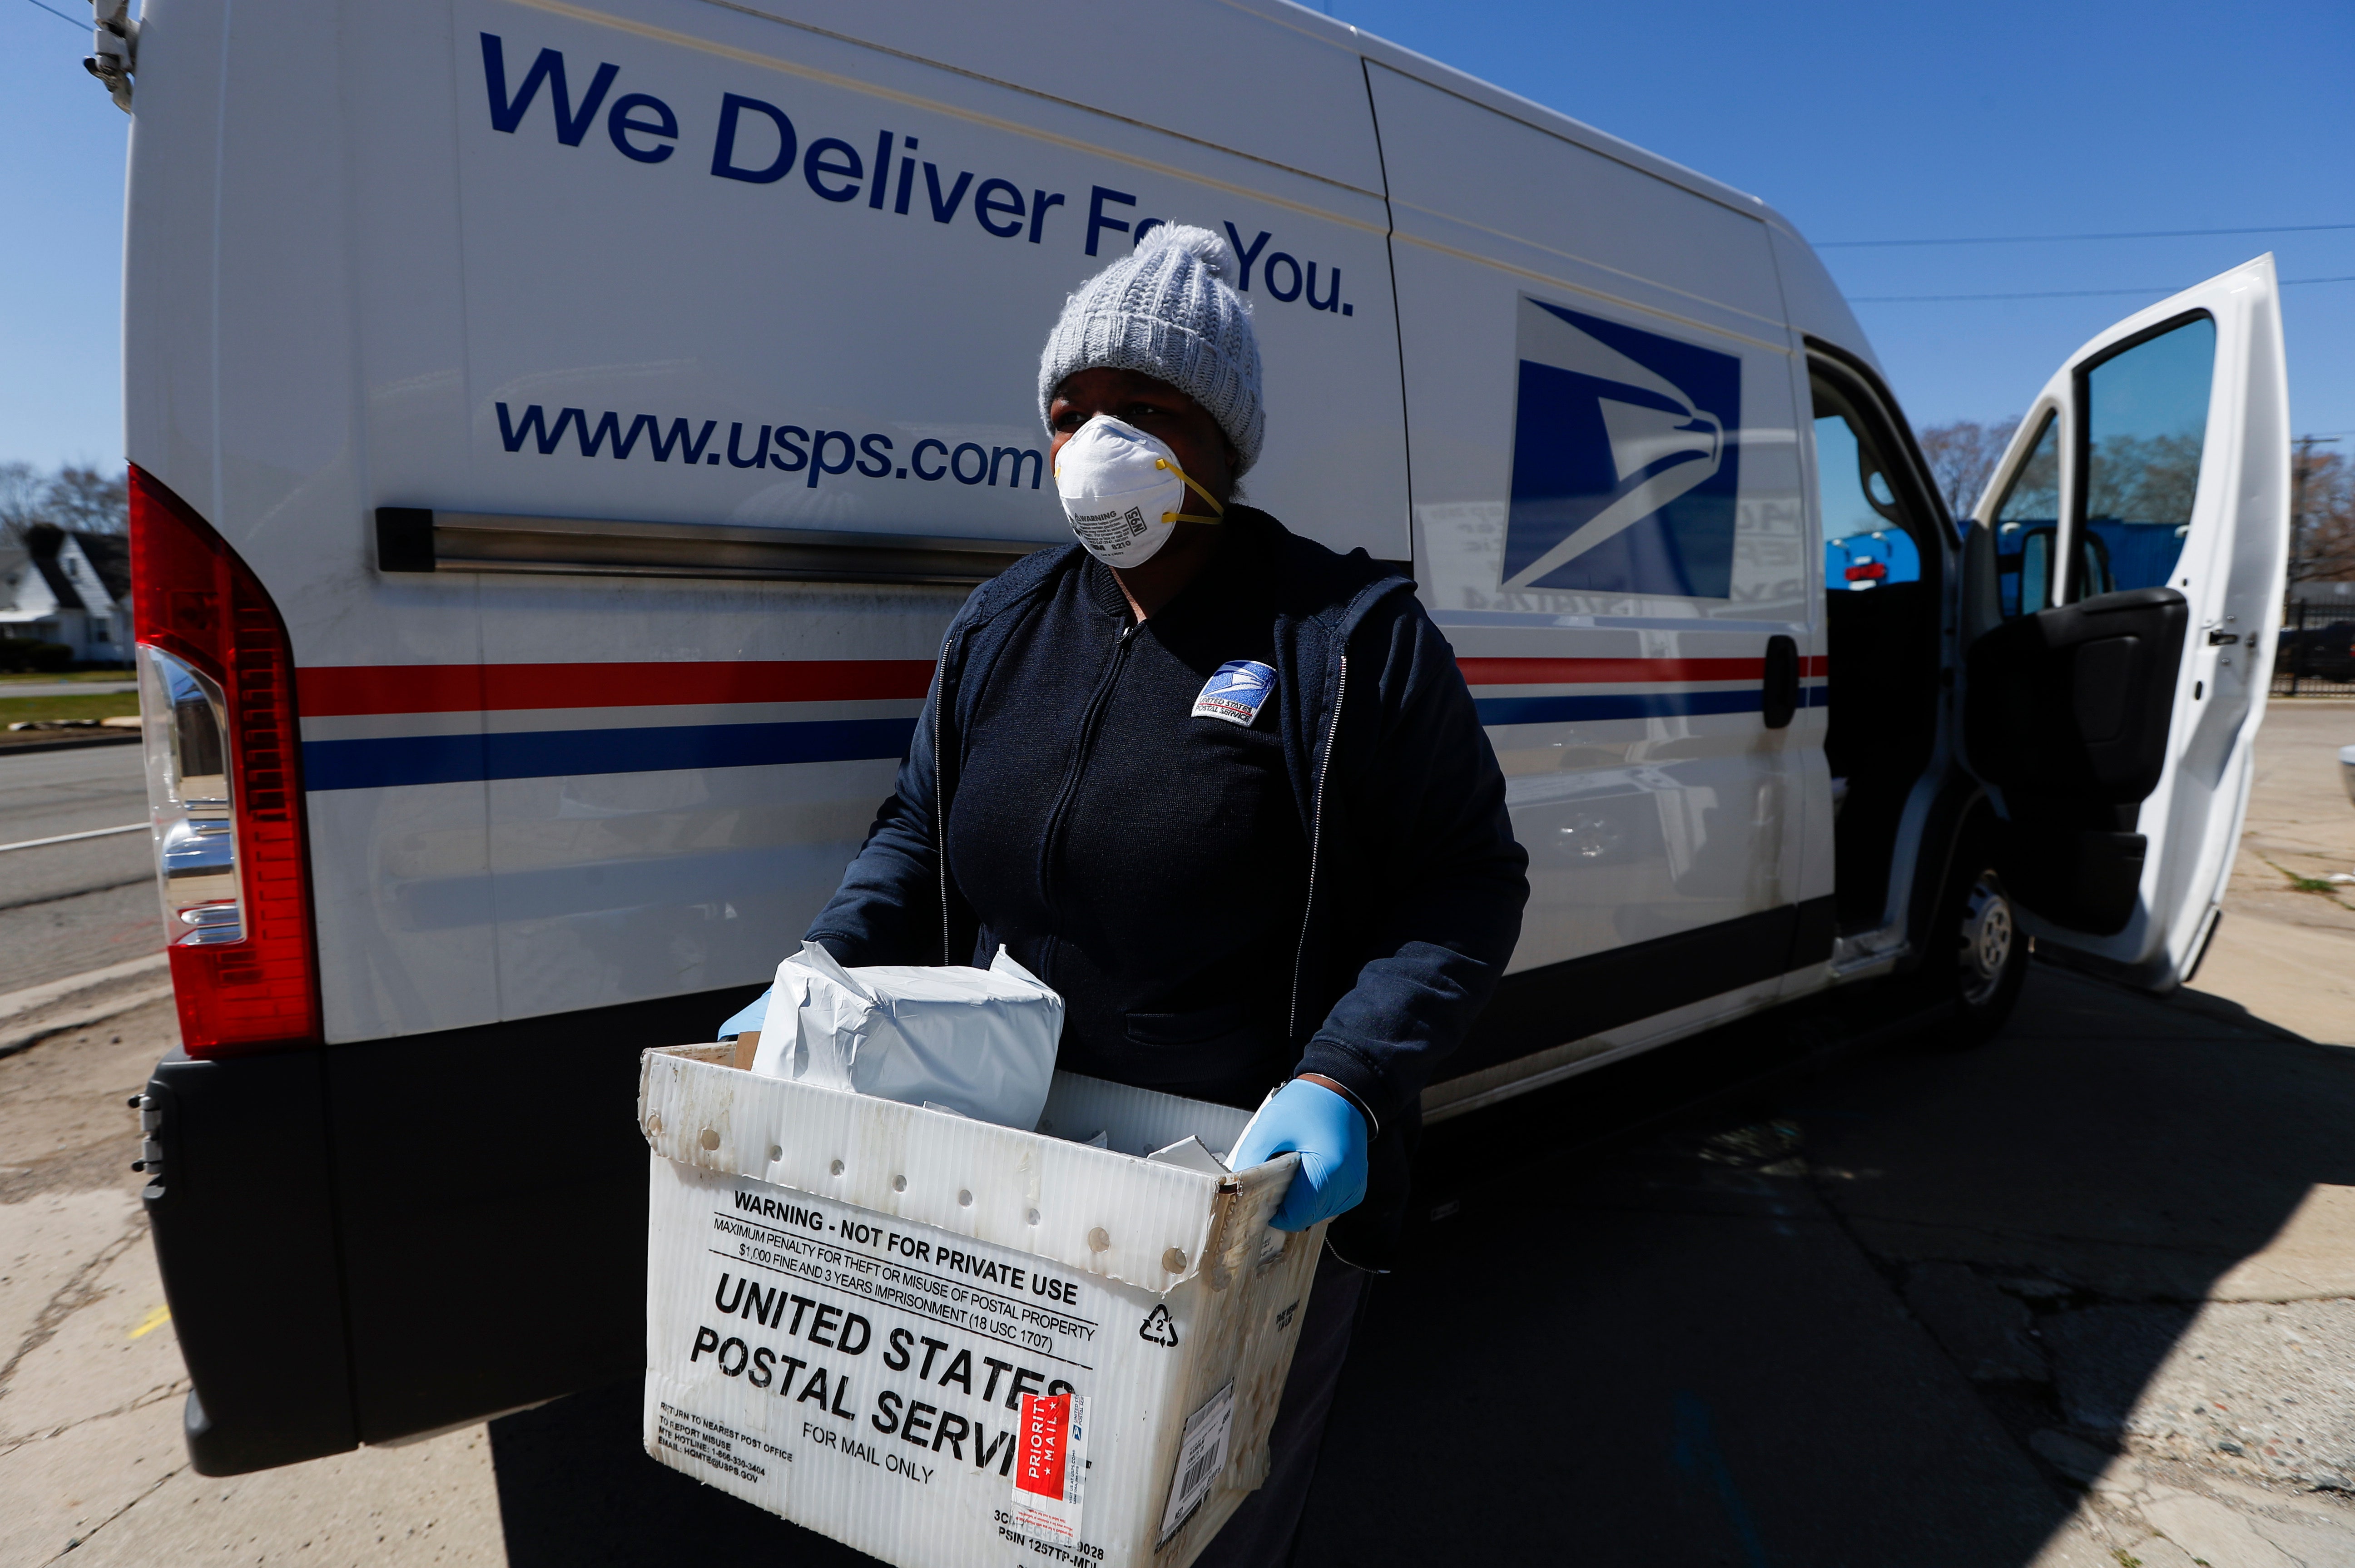 Postal service to consolidate postal districts offers early retirement to non-union workers